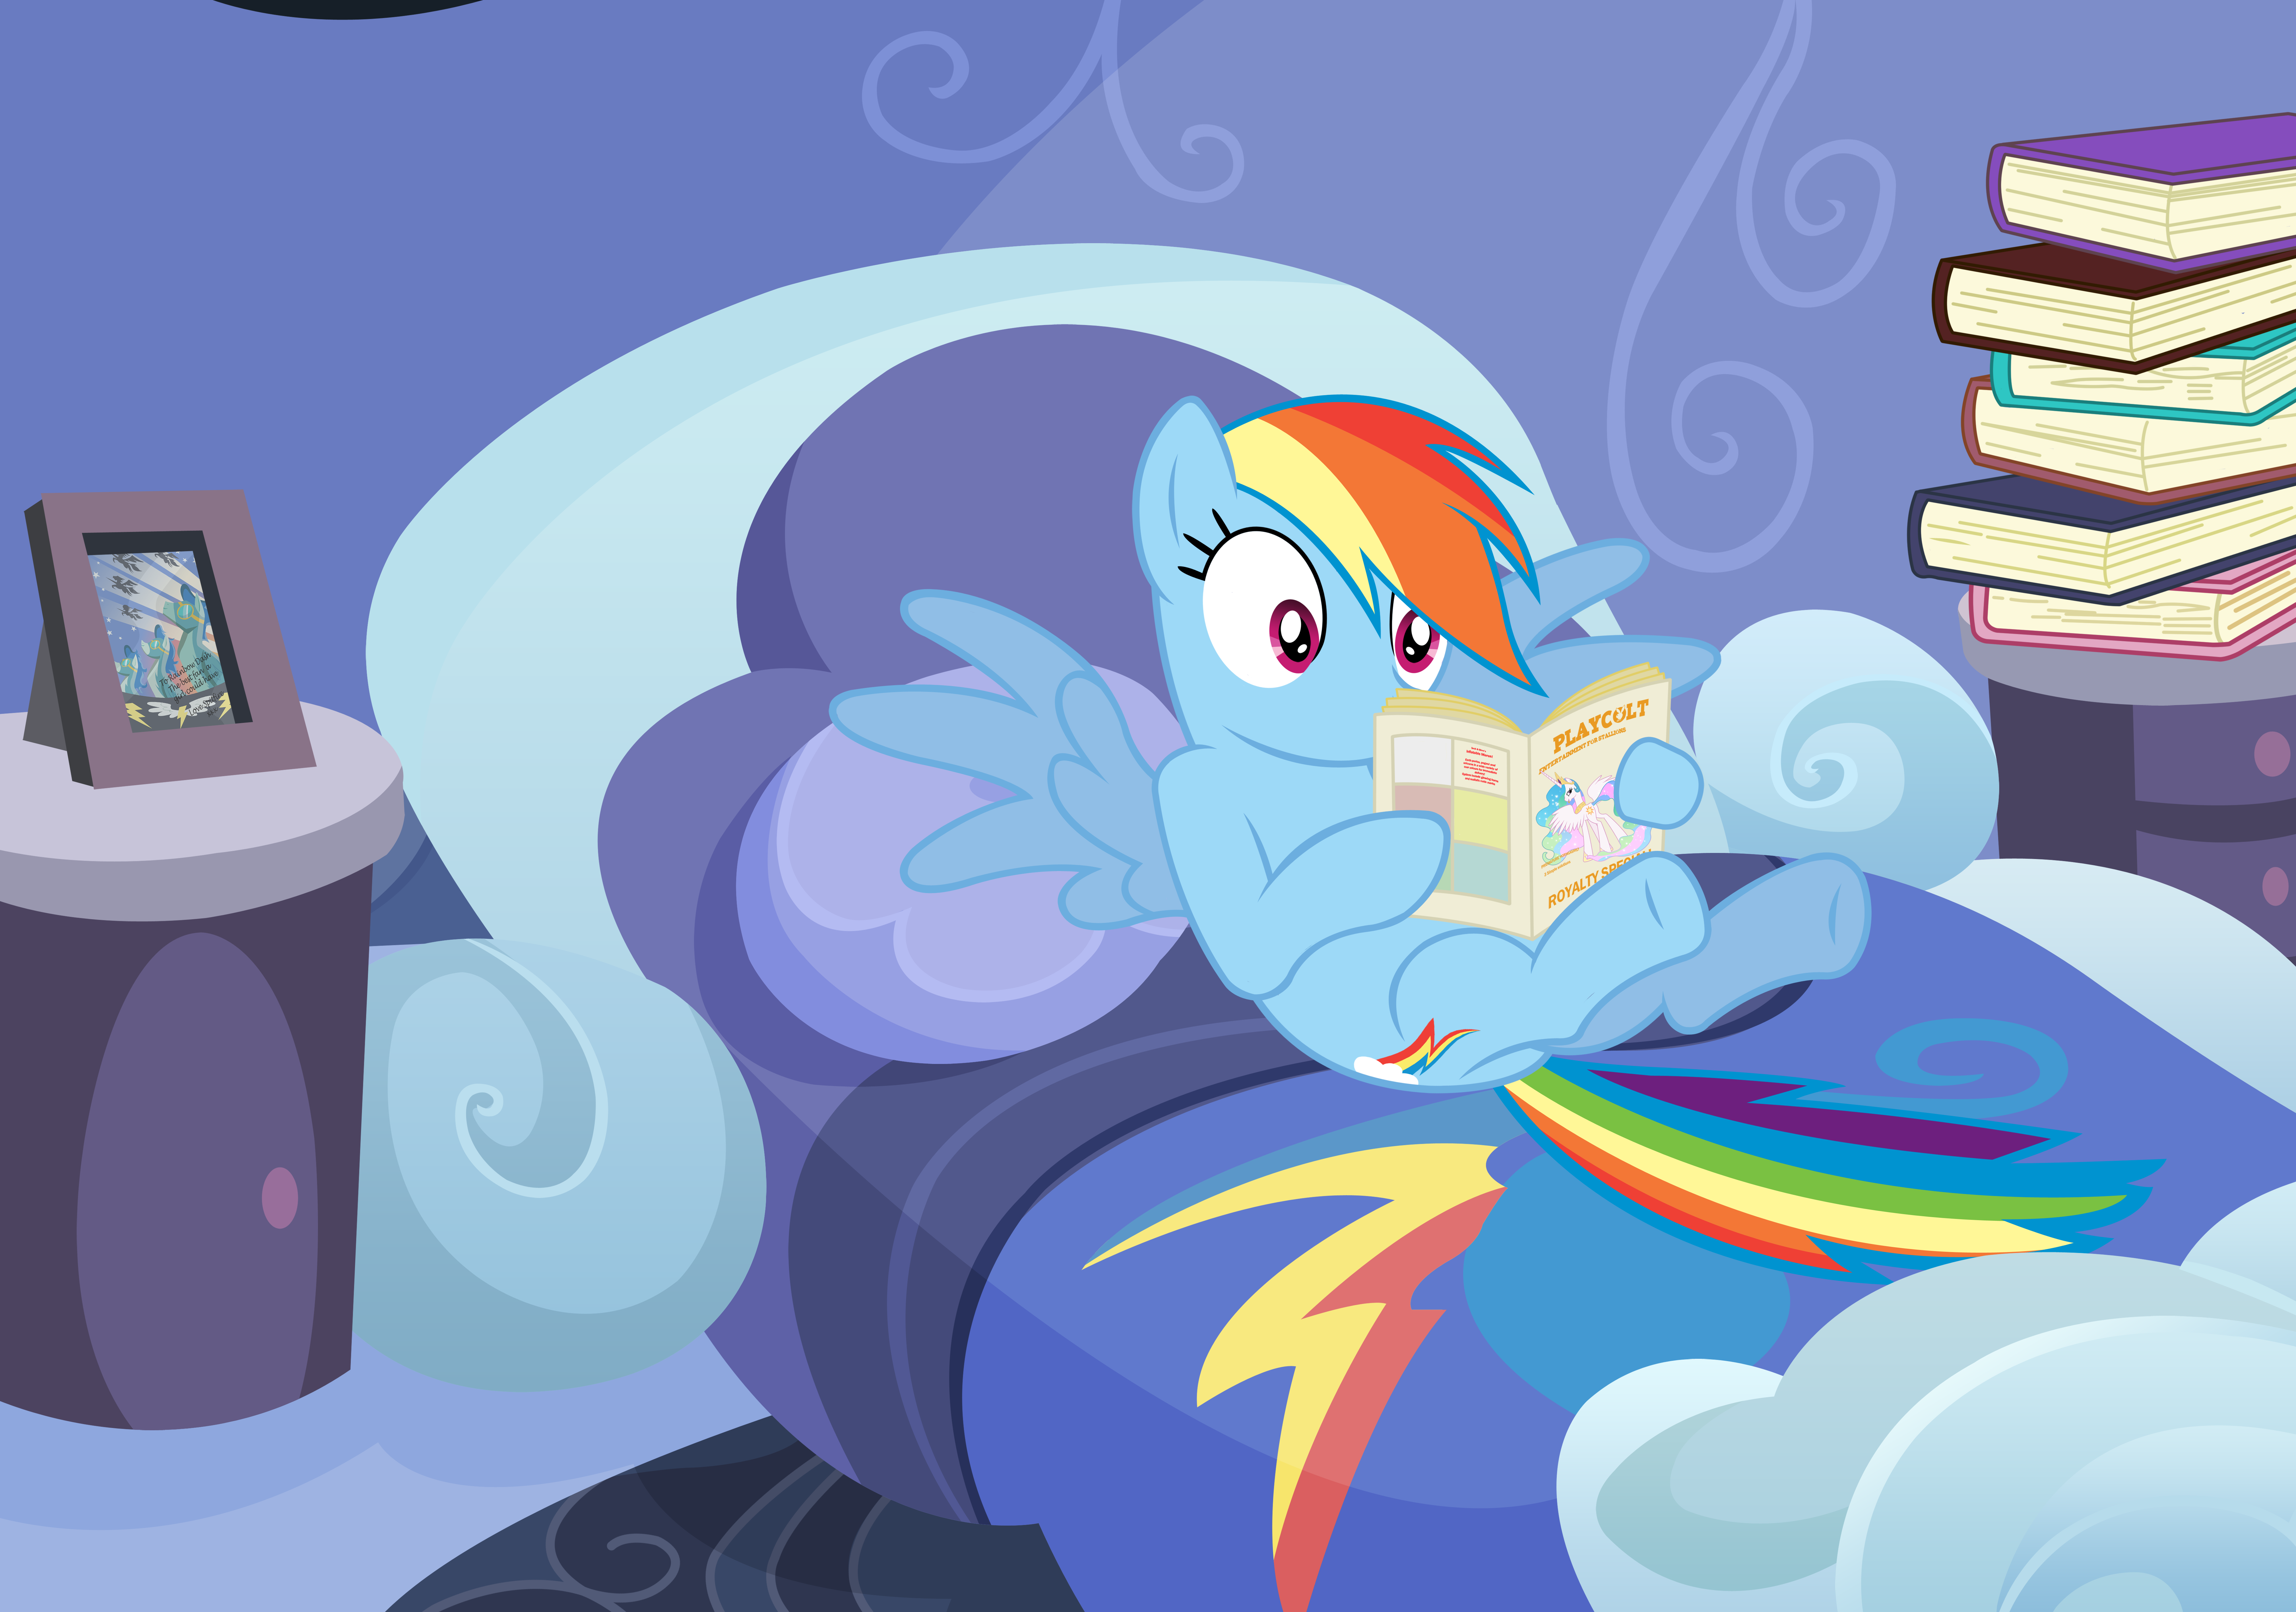 [Obrázek: dashie_discovers_magazines_by_moonbrony-d4sxsig.png]